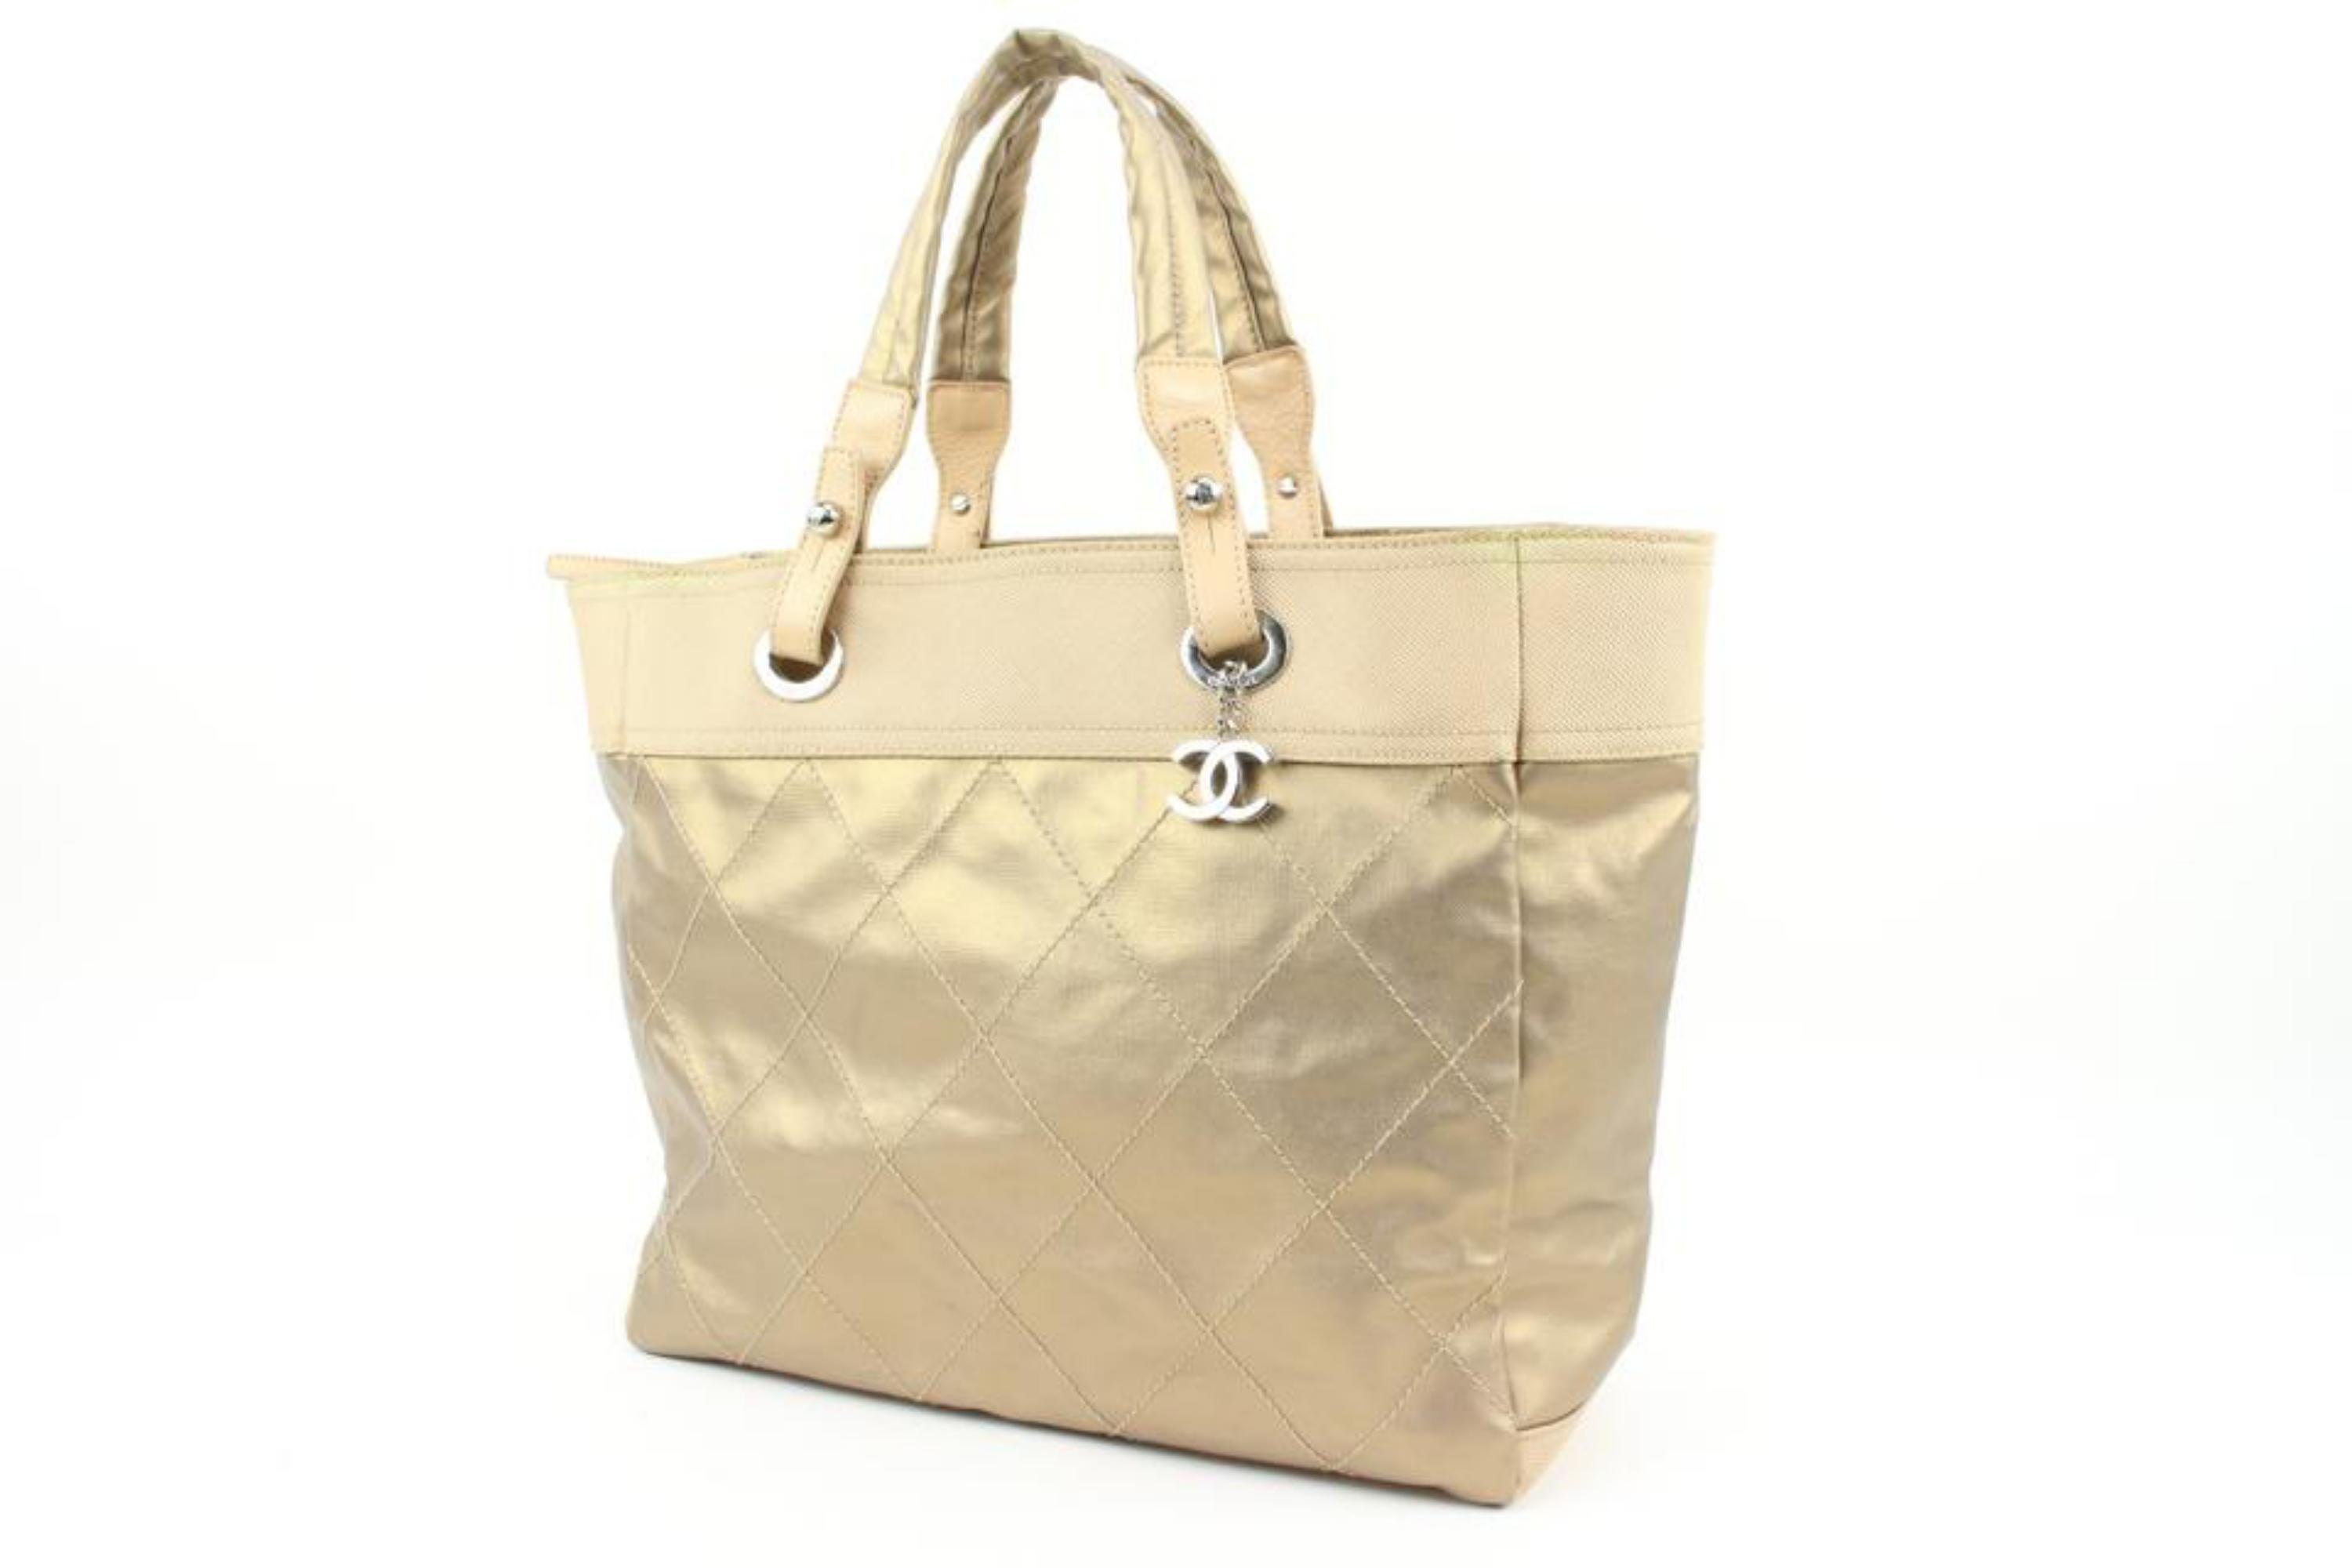 Chanel Gold Quilted CC Logo Biarritz GM Tote 8c131s
Date Code/Serial Number: 11390274
Made In: Italy
Measurements: Length:  17.5